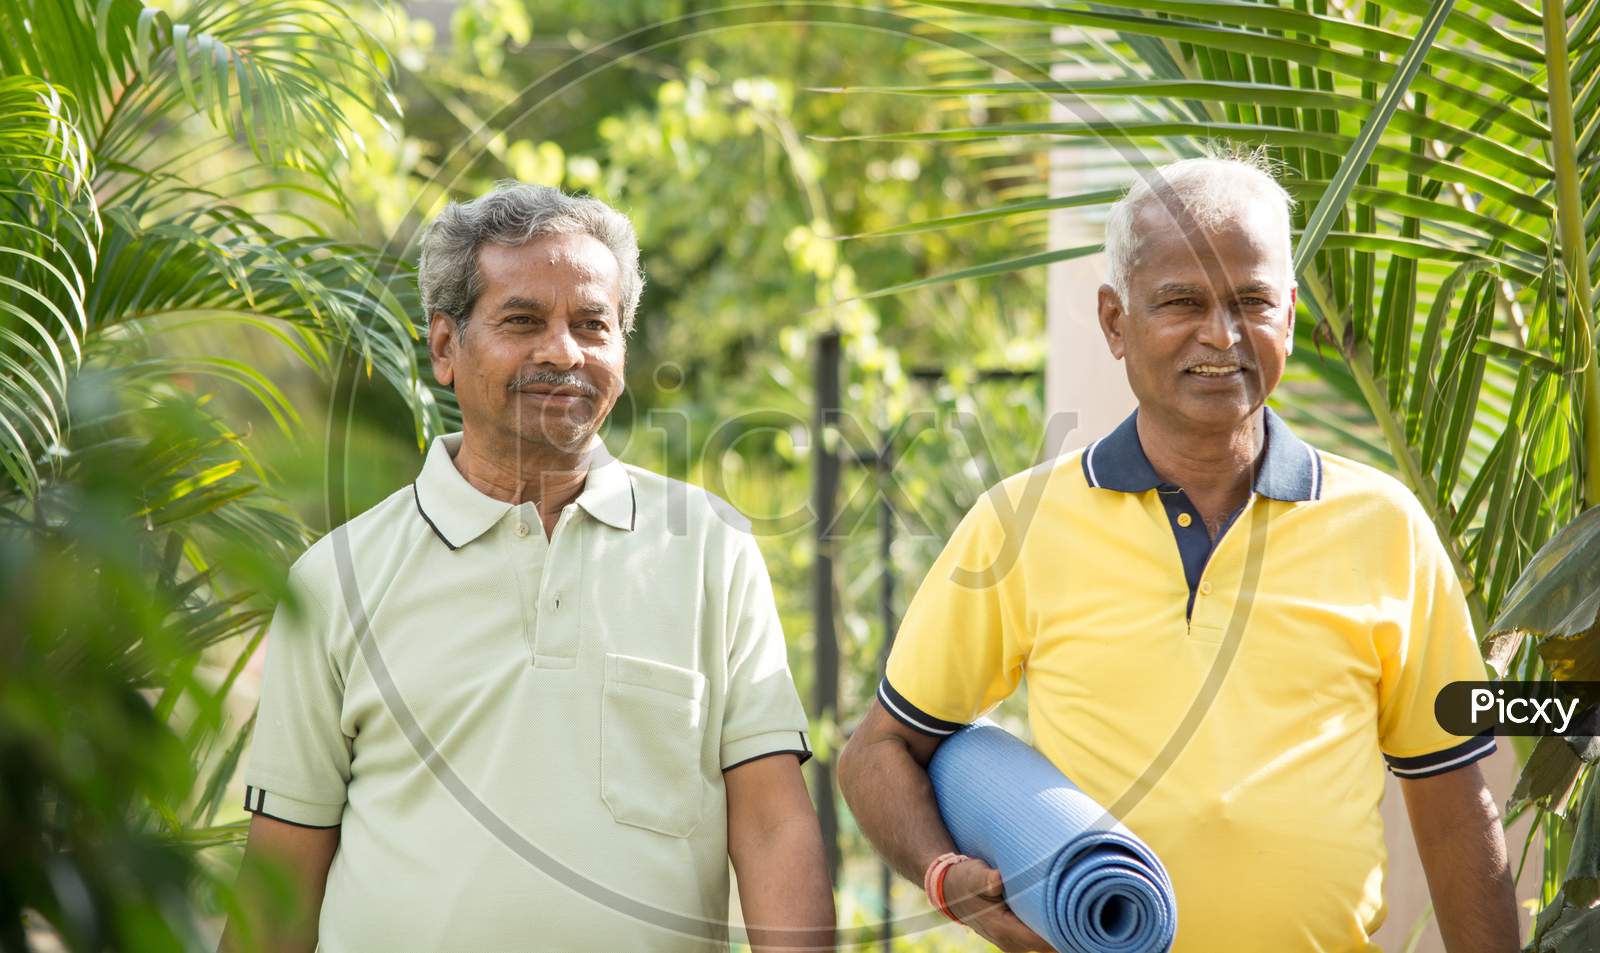 A couple of Old or Elderly Men's Walking Together with Yoga Matt in Hands